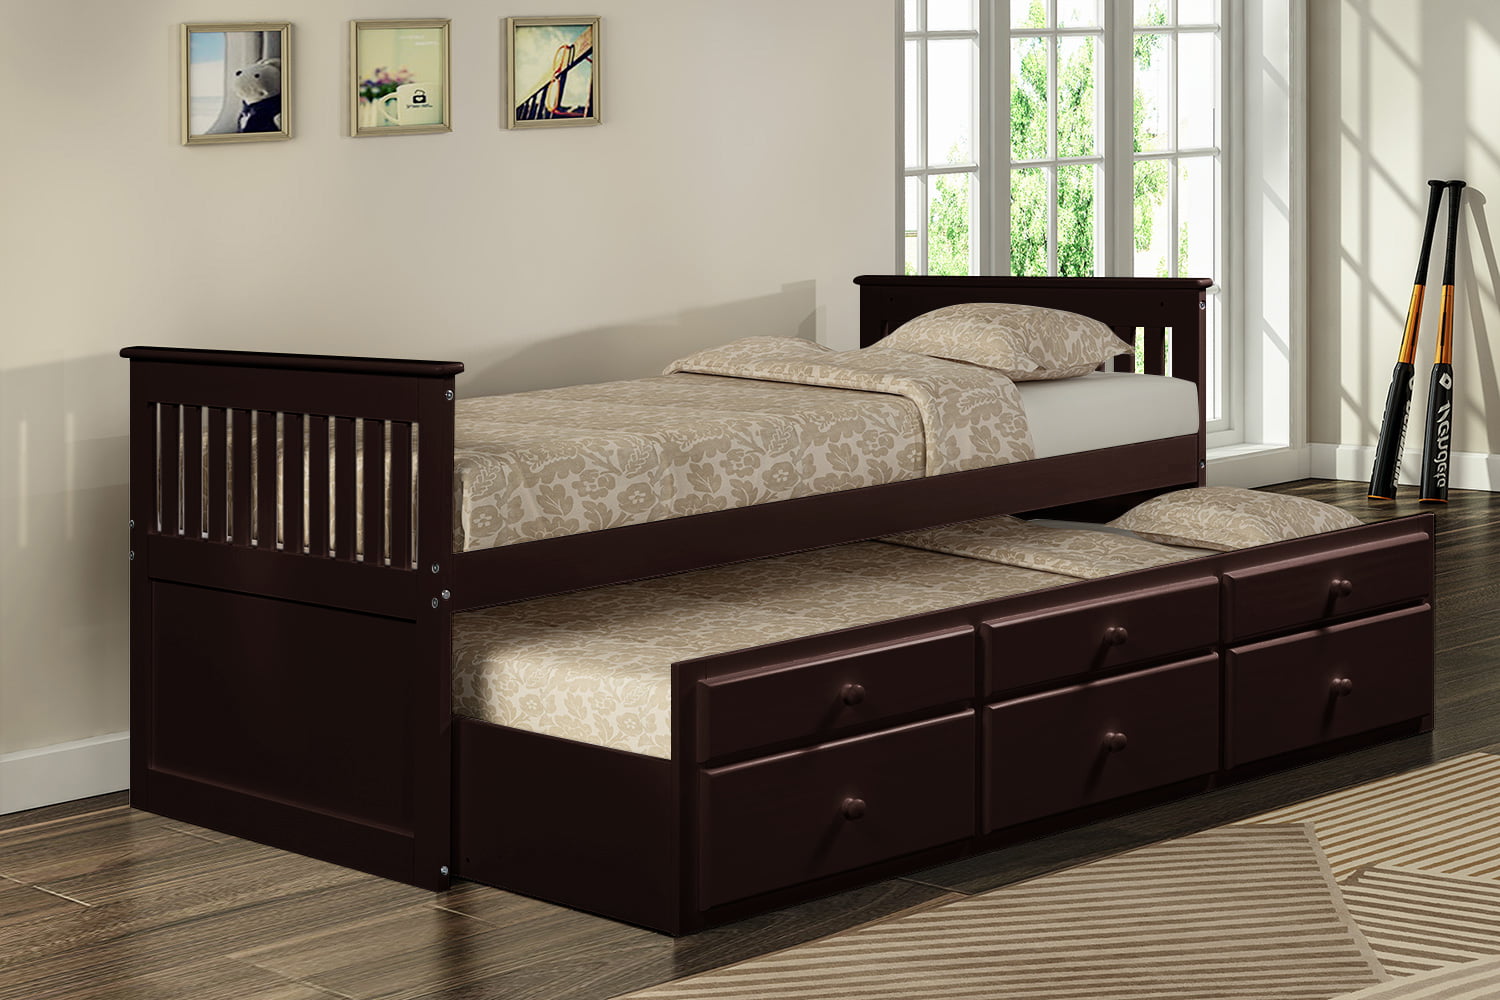 Farmhouse Style Daybed Bed With Trundle, Solid Wood Twin Sleigh Bed With Trundle